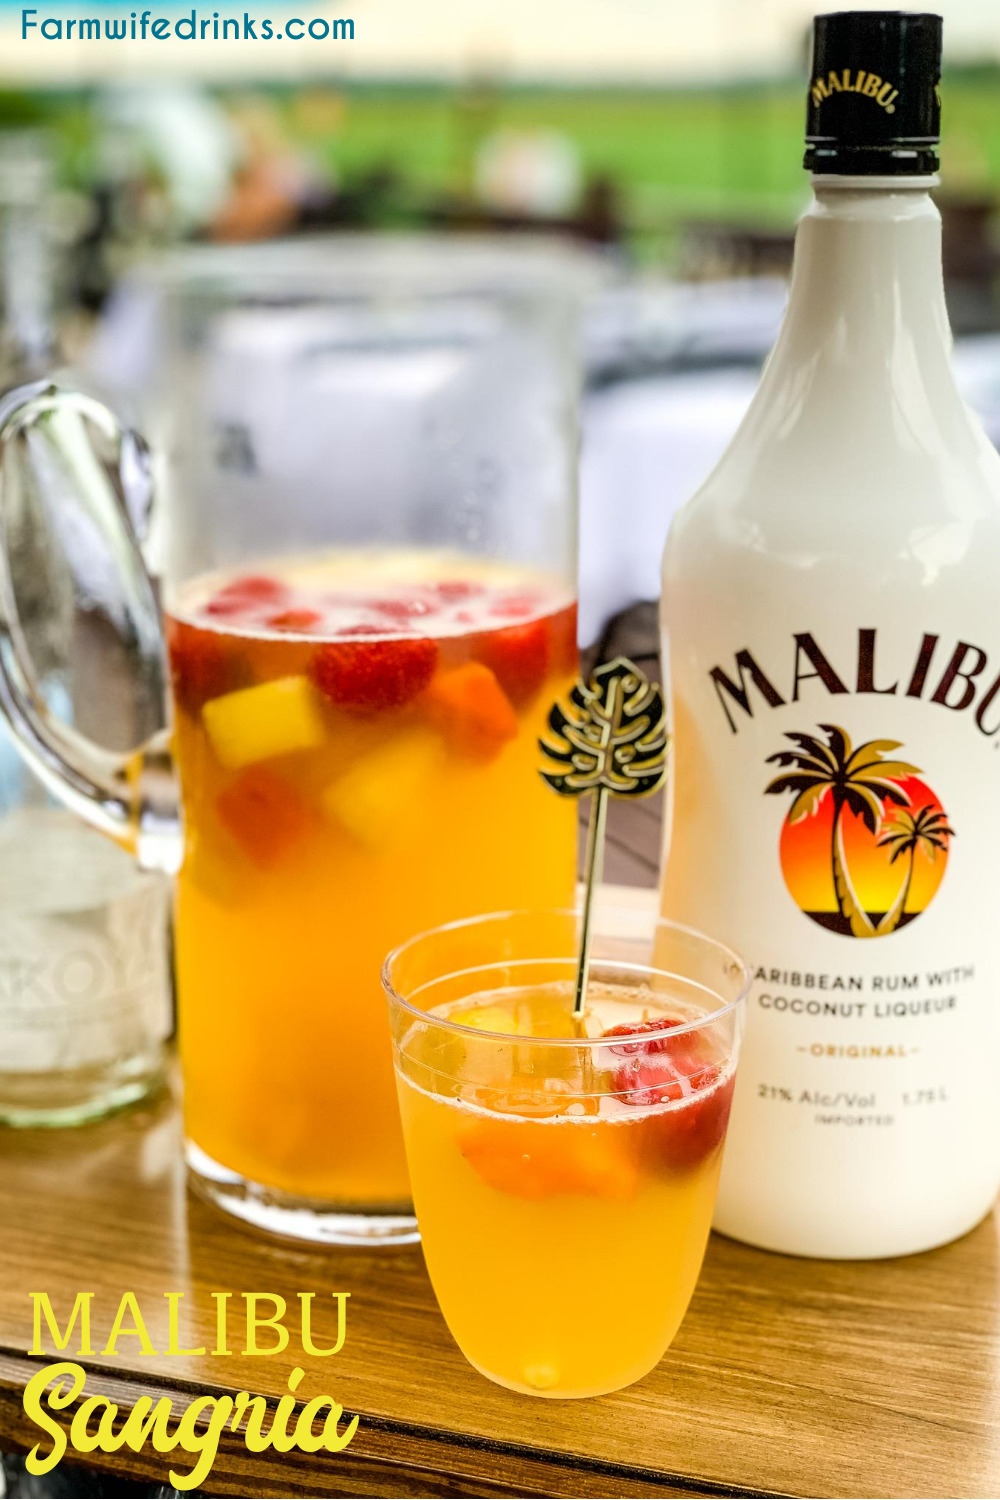 Malibu sangria recipe is a simple and perfect tropical drink for a summer day pool cocktail made with white wine, Malibu Rum, pineapple juice, and tropical frozen fruit like pineapple and mangos.